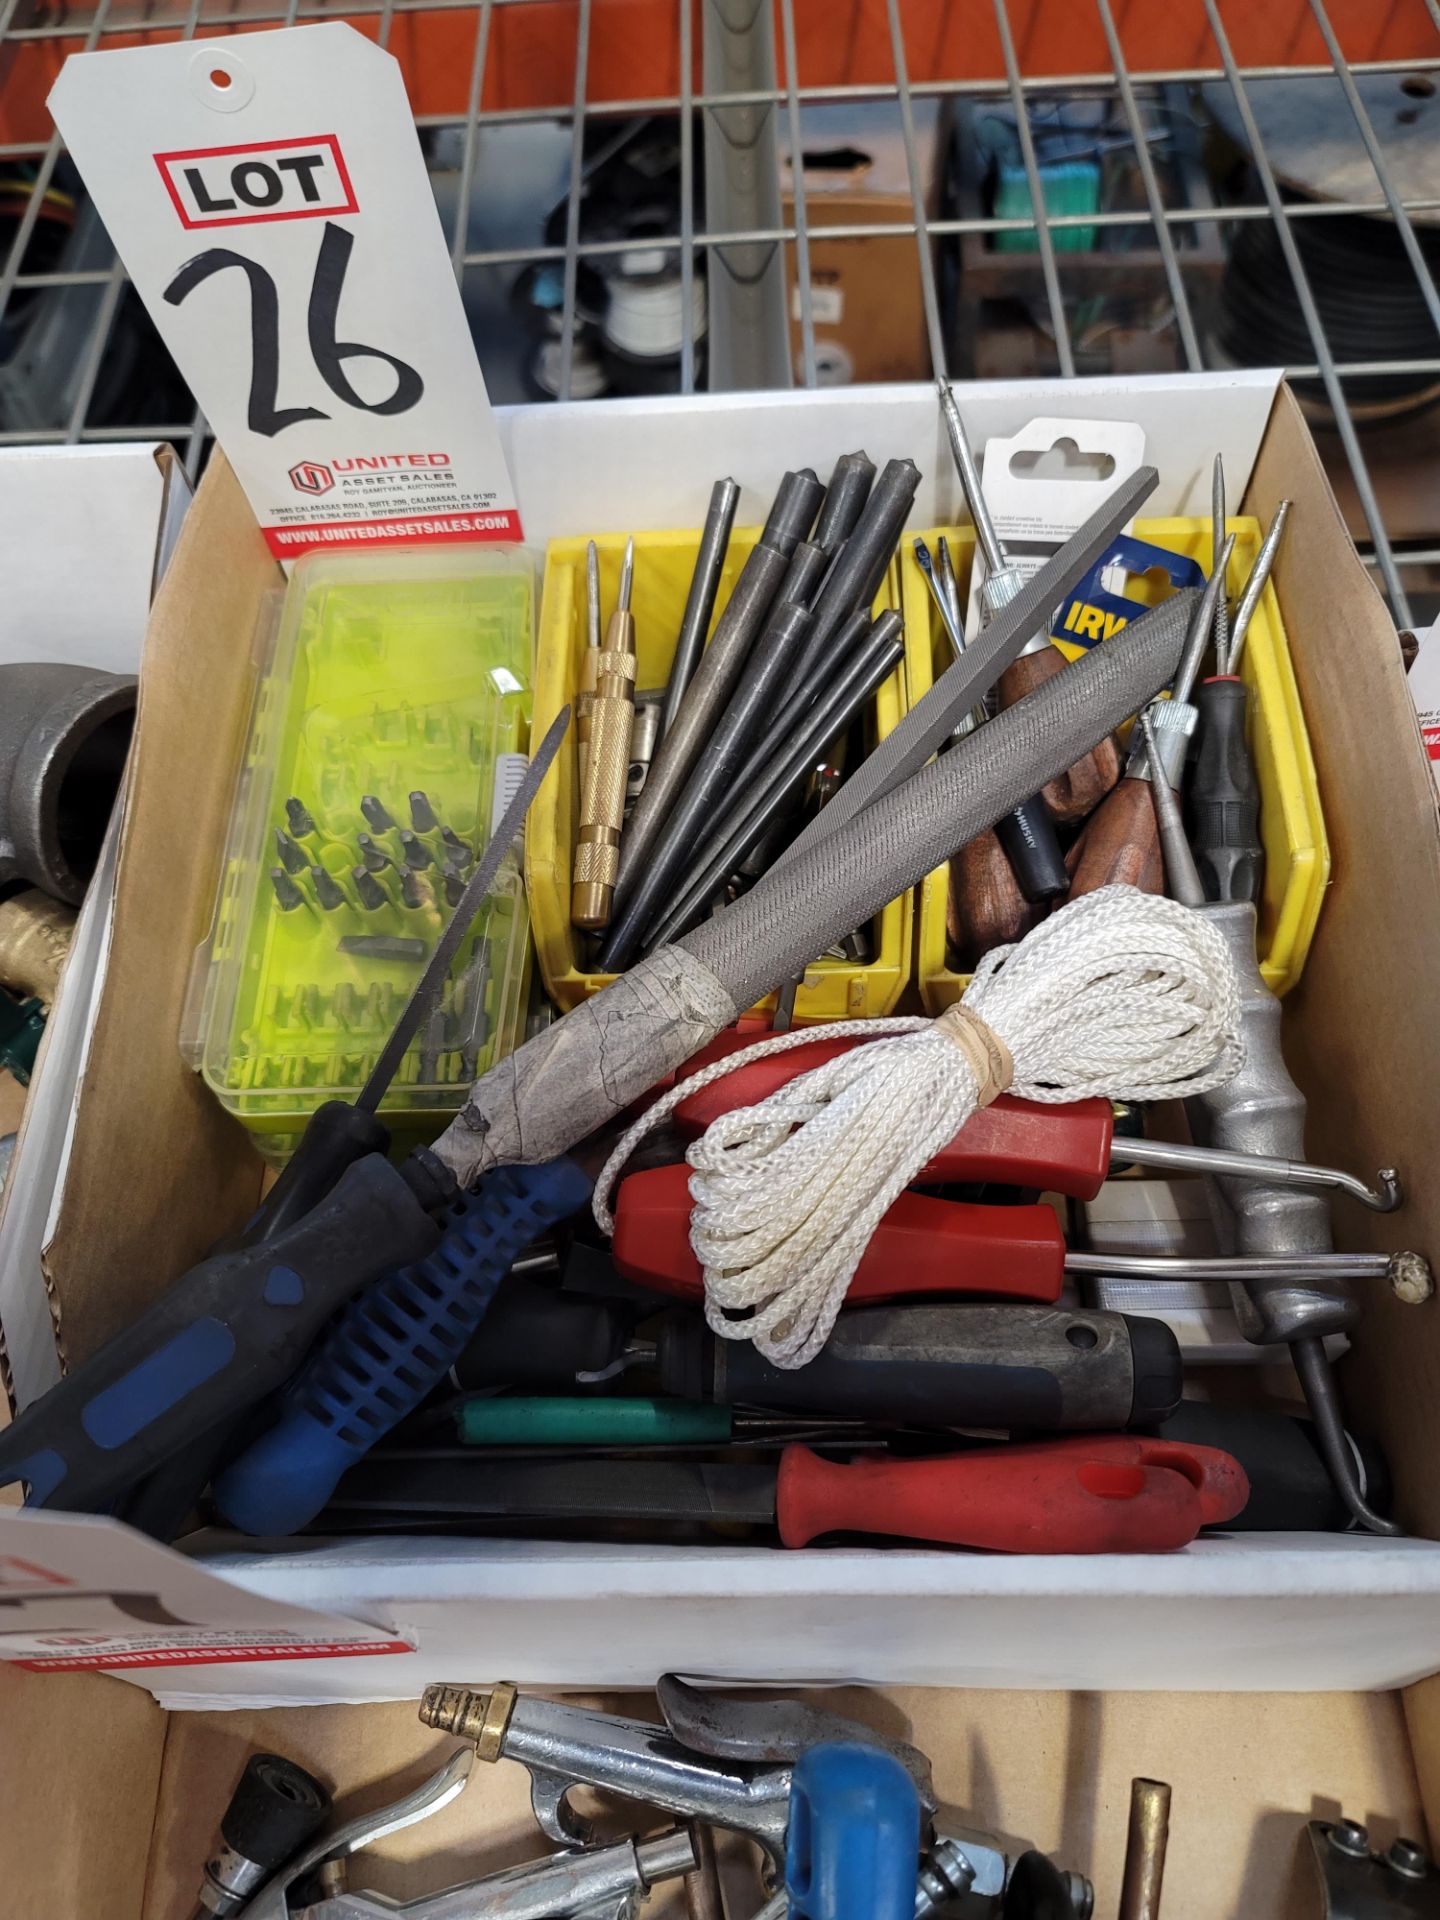 LOT - MISC HAND TOOLS: SCRATCH AWLS, CENTER PUNCHES, FILES, ETC.